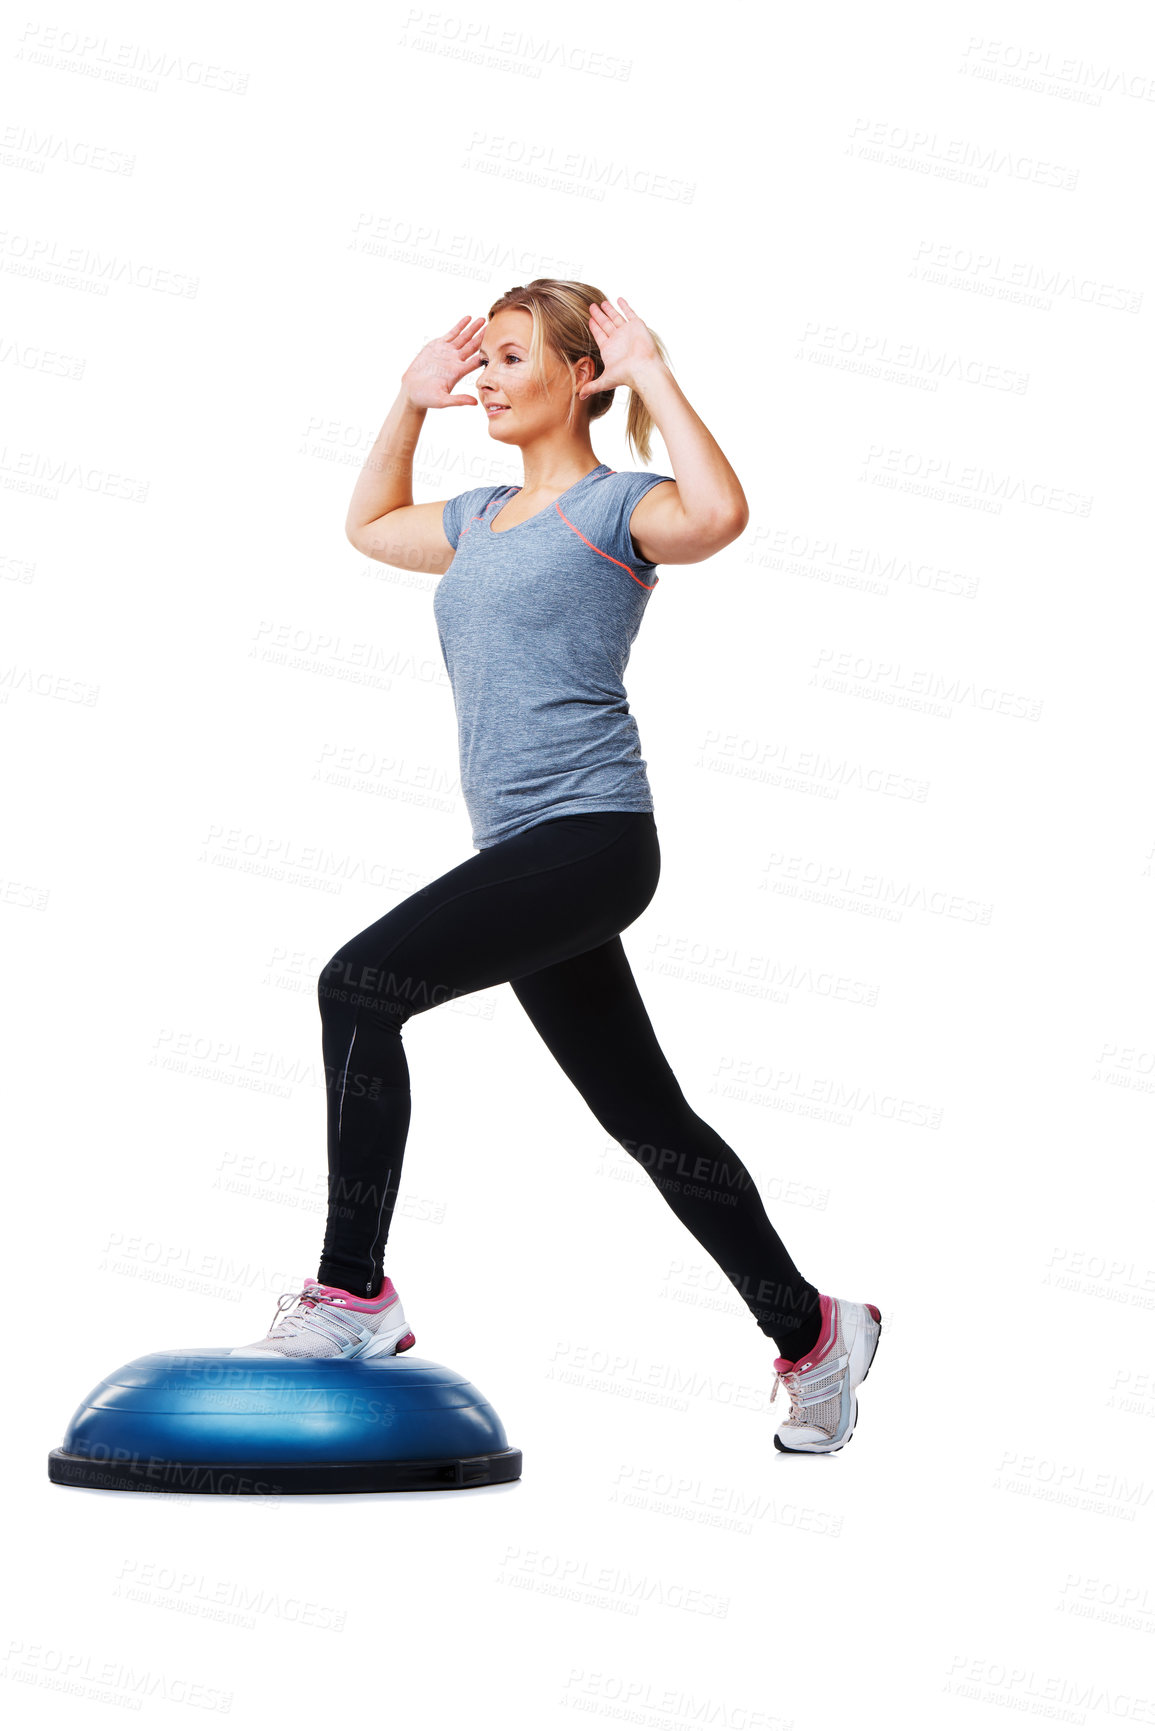 Buy stock photo Studio, half ball and woman training for gym commitment, physical exercise or aerobics performance. Fitness club, balance platform and pilates person in muscle stability workout on white background